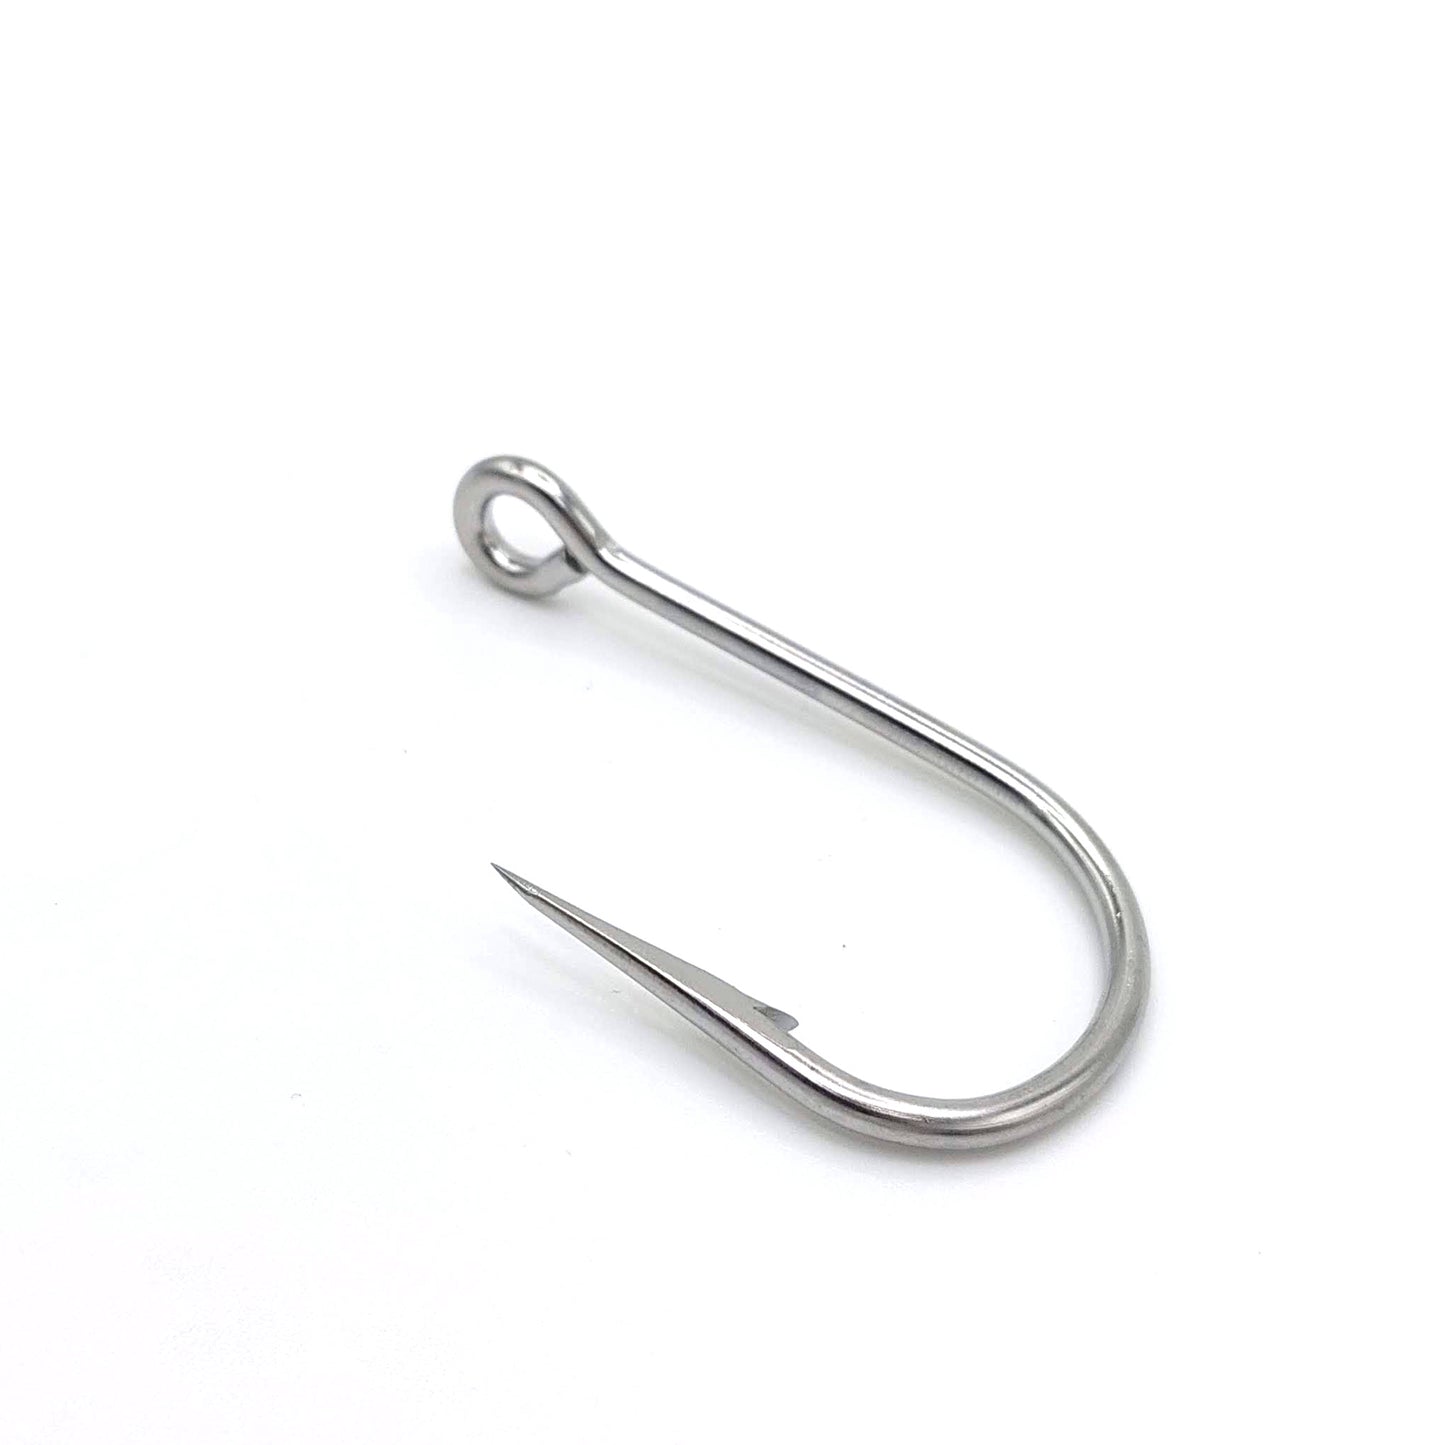 95160-SS Mustad Siwash Hook Stainless Steel 3X Strong - Evolution Lures